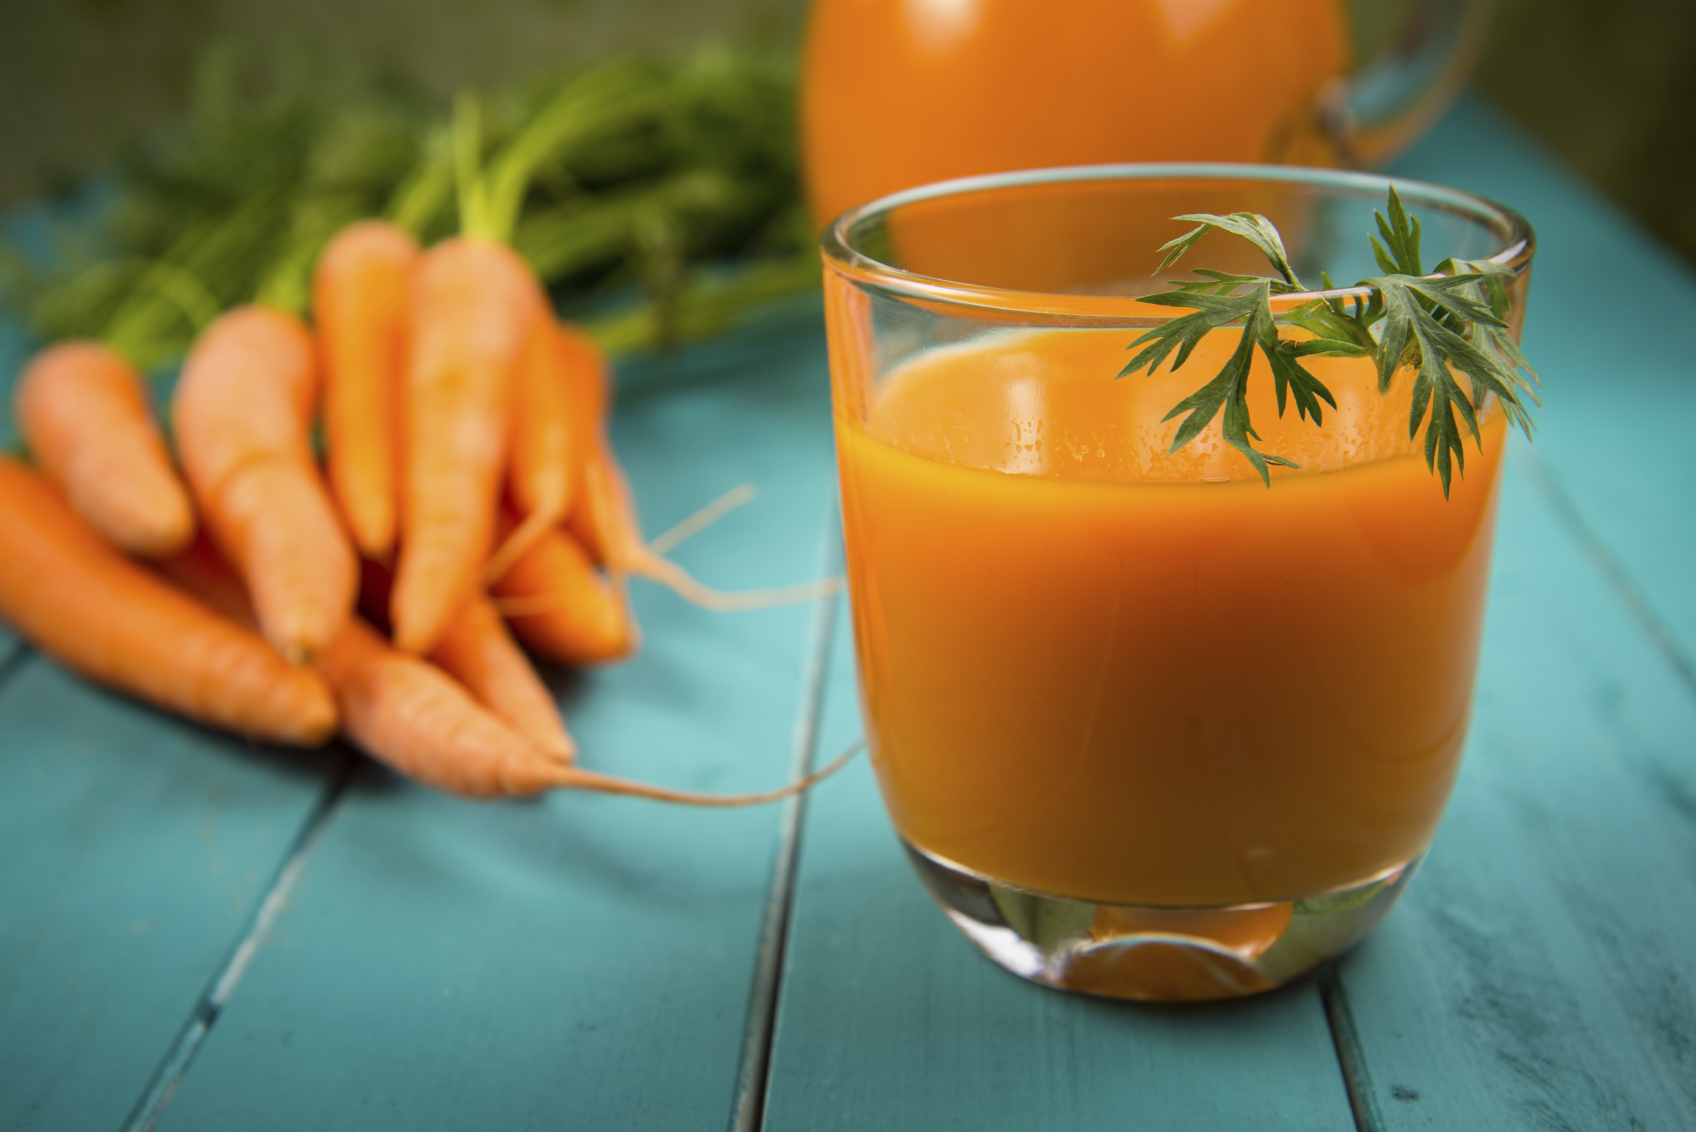 How Do You Make Carrot Juice By Hand In Rembang City